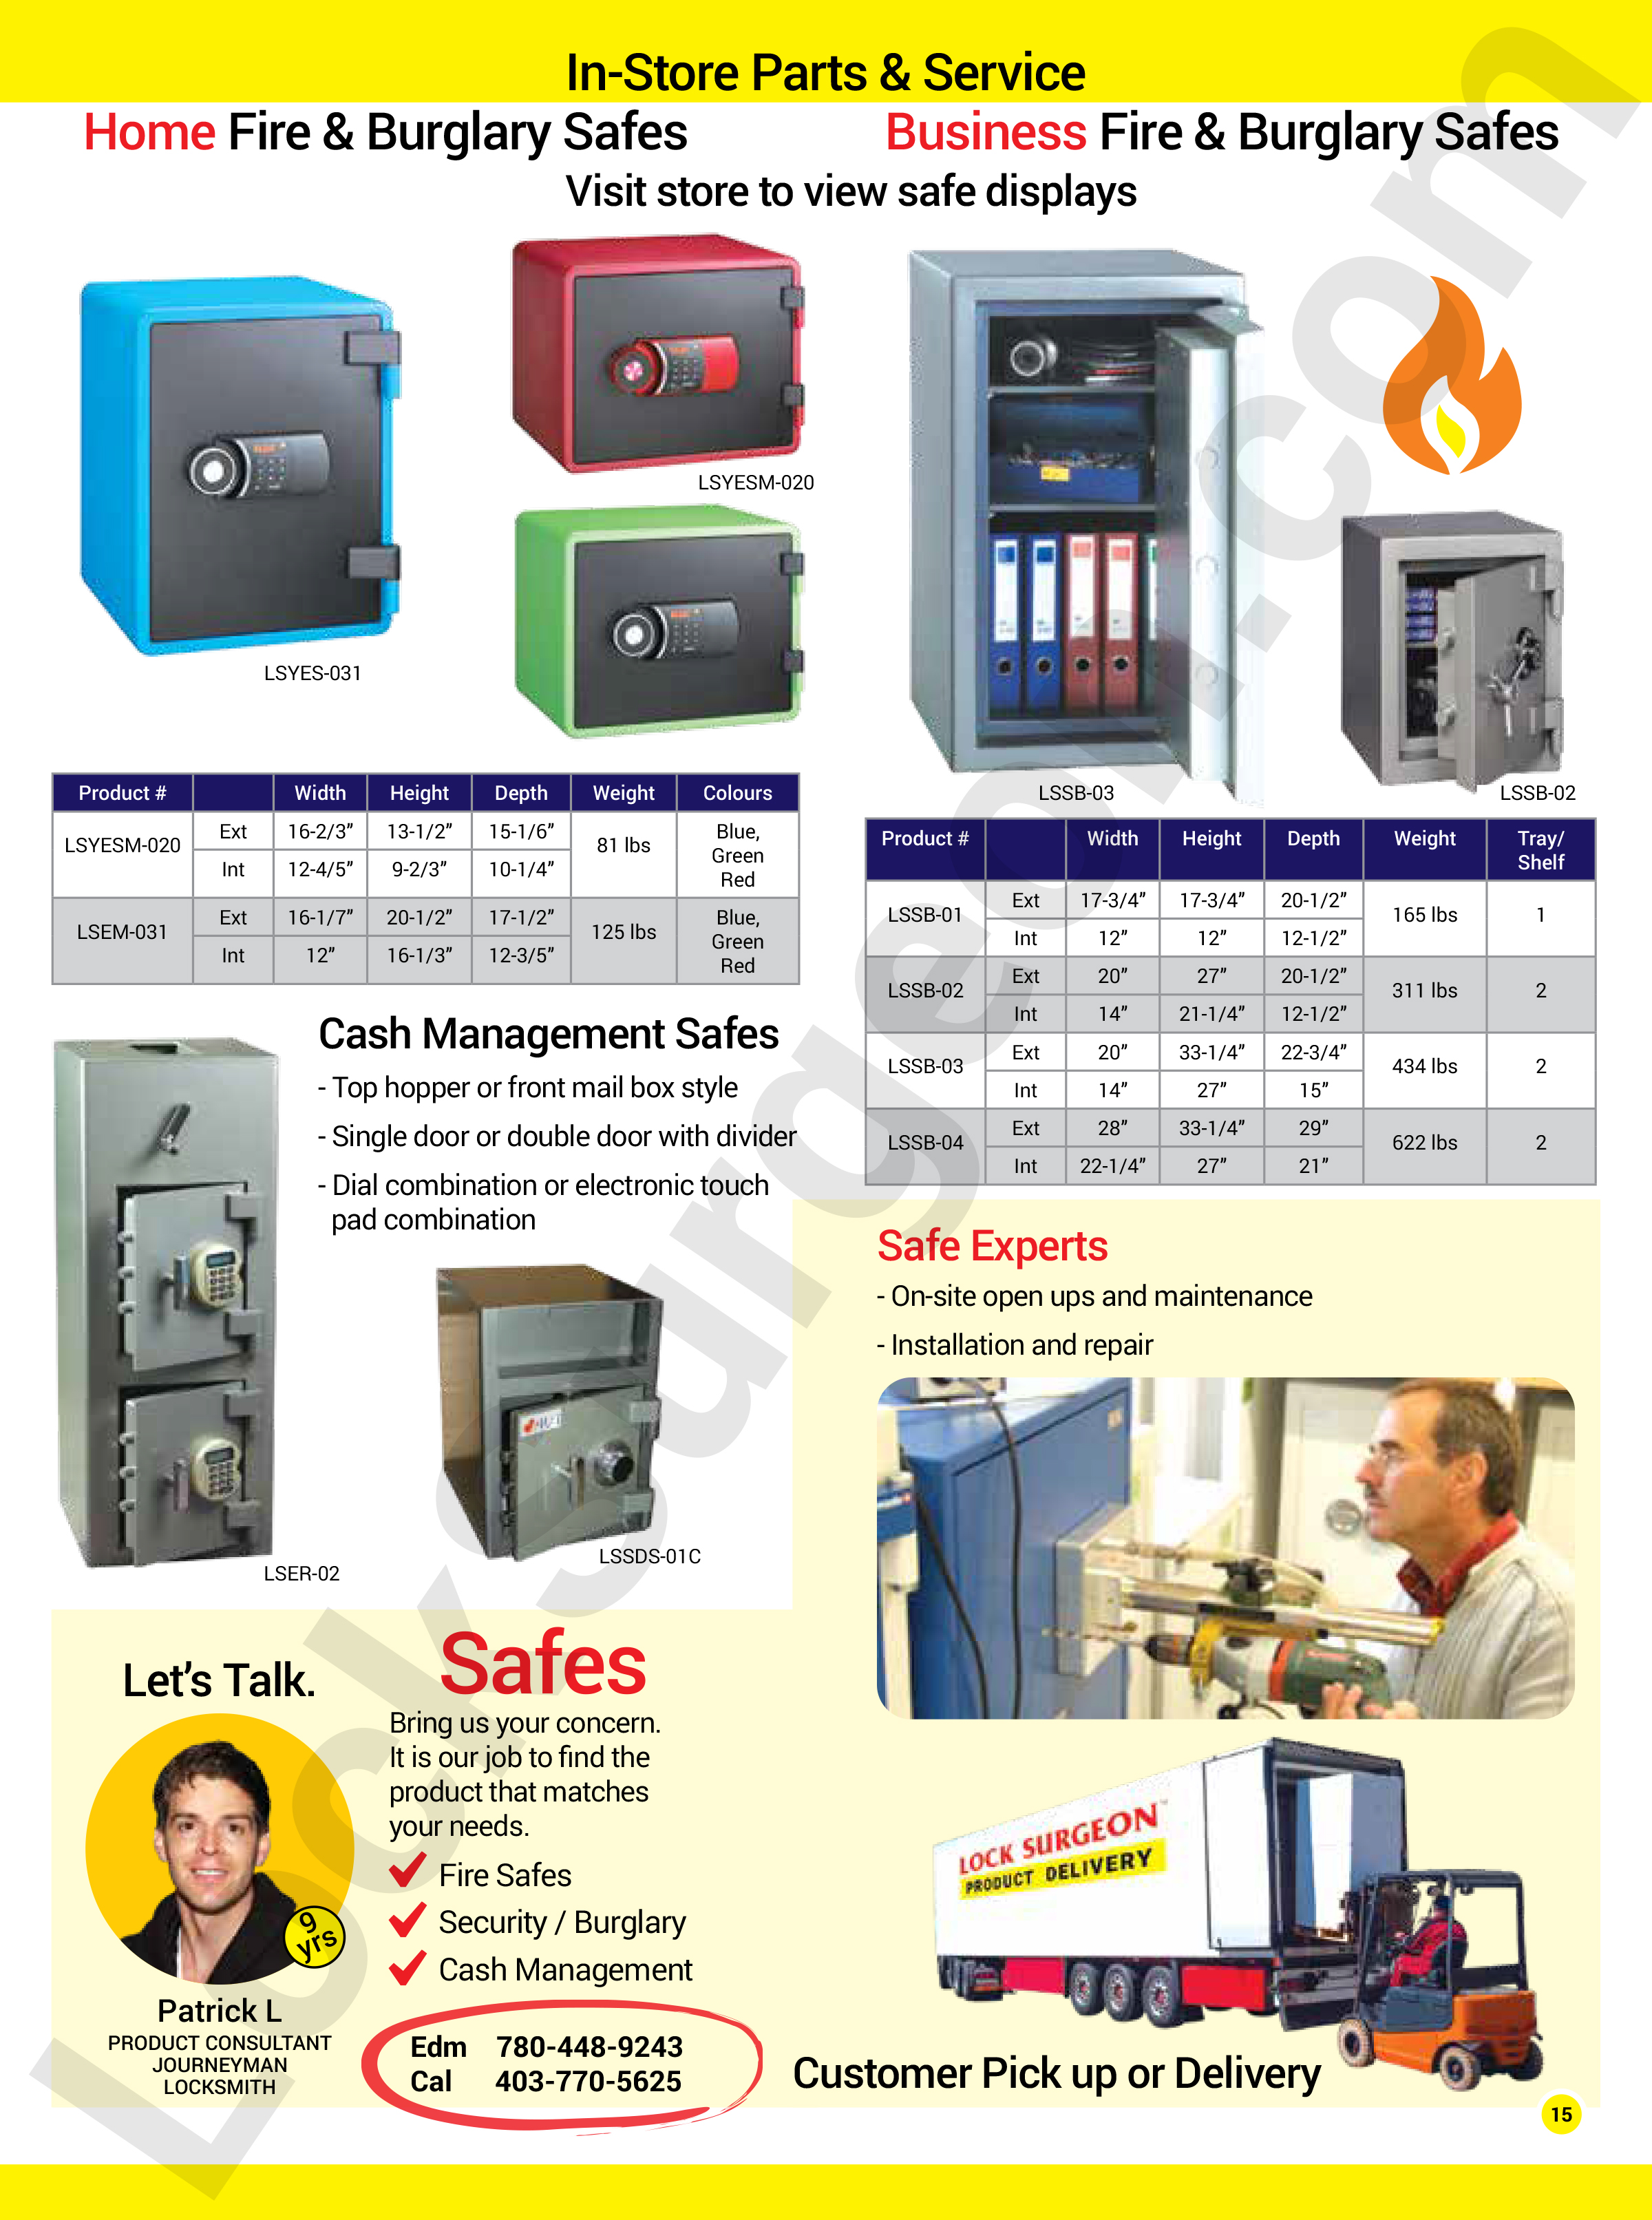 Residential home fire and burglary safes in a variety of sizes. Commercial business fire and burglary safes with 2hr fire ratings in sizes to meet your document and or valuable safe storage needs. Cash-management safes with top-hoppers or front mailbox styles, dial or digital combinations, double-door or single-door safes are also available. Safe opening, repair and delivery are also part of Lock Surgeon safe-service professional abilities.